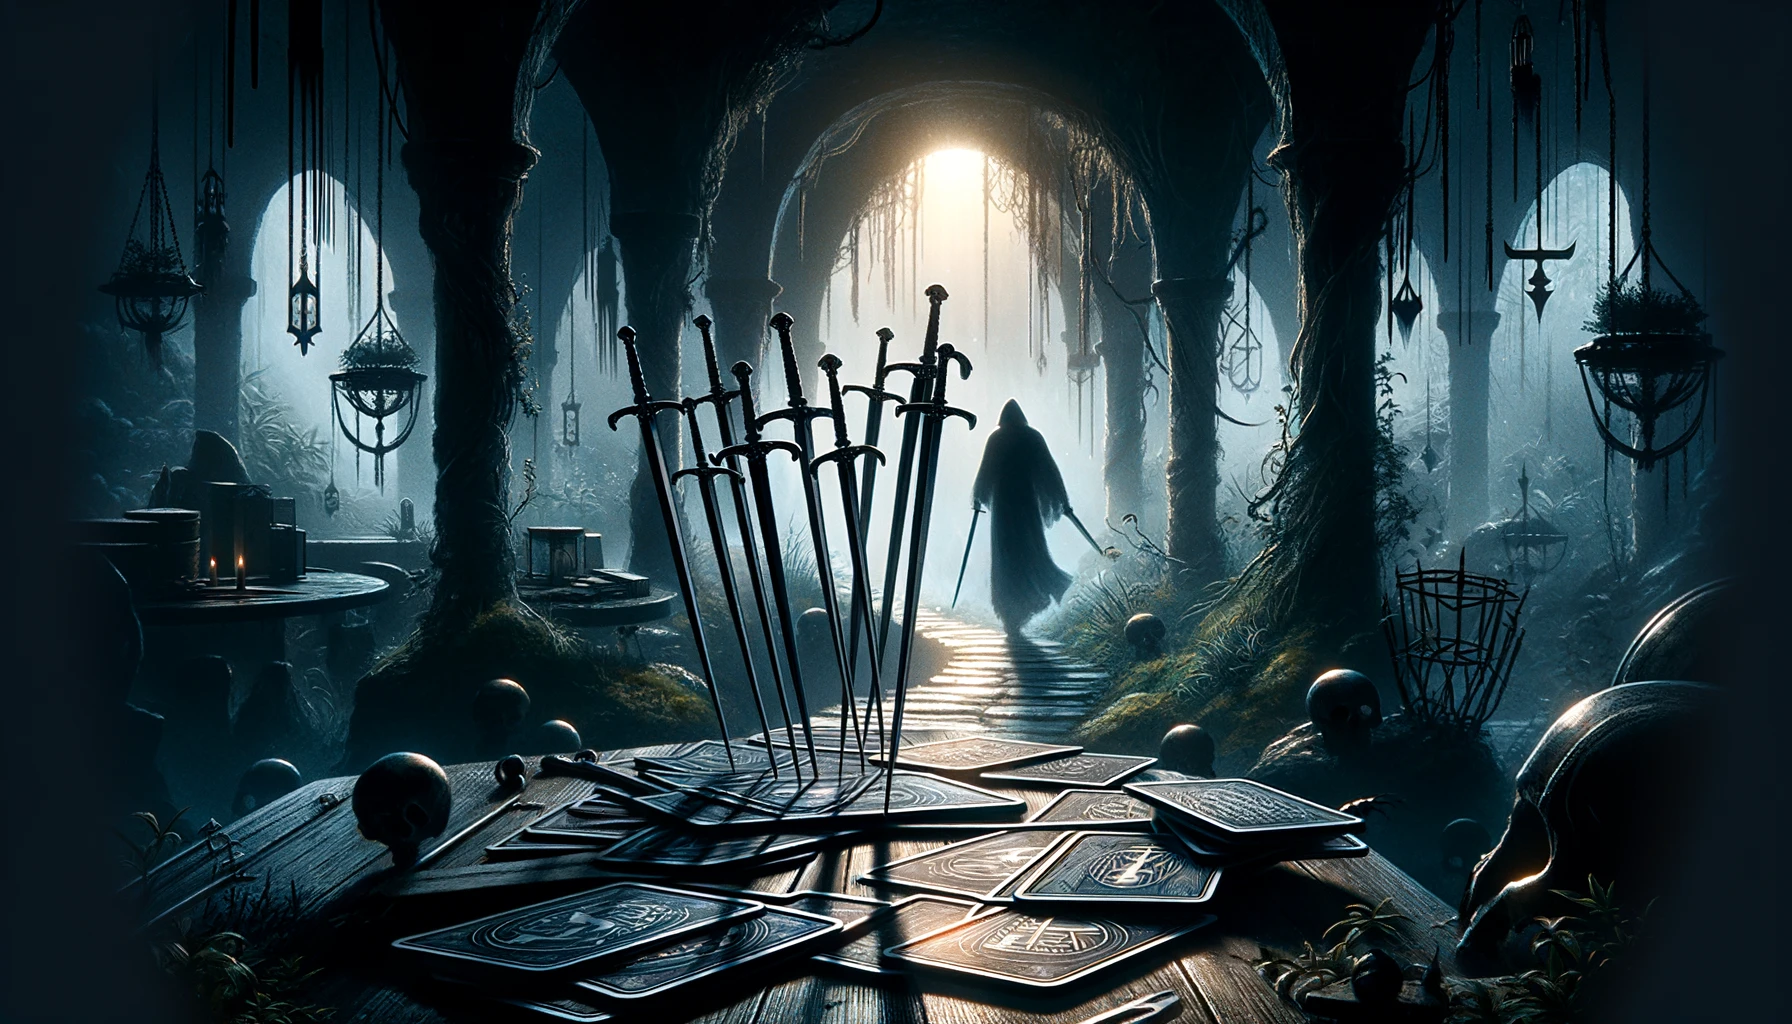 "Depicting a shadowy figure stealthily departing with swords in a mysterious environment, symbolizing intrigue, strategy, and potential betrayal, complementing discussions on navigating life's challenges with mental acuity and ethical considerations."